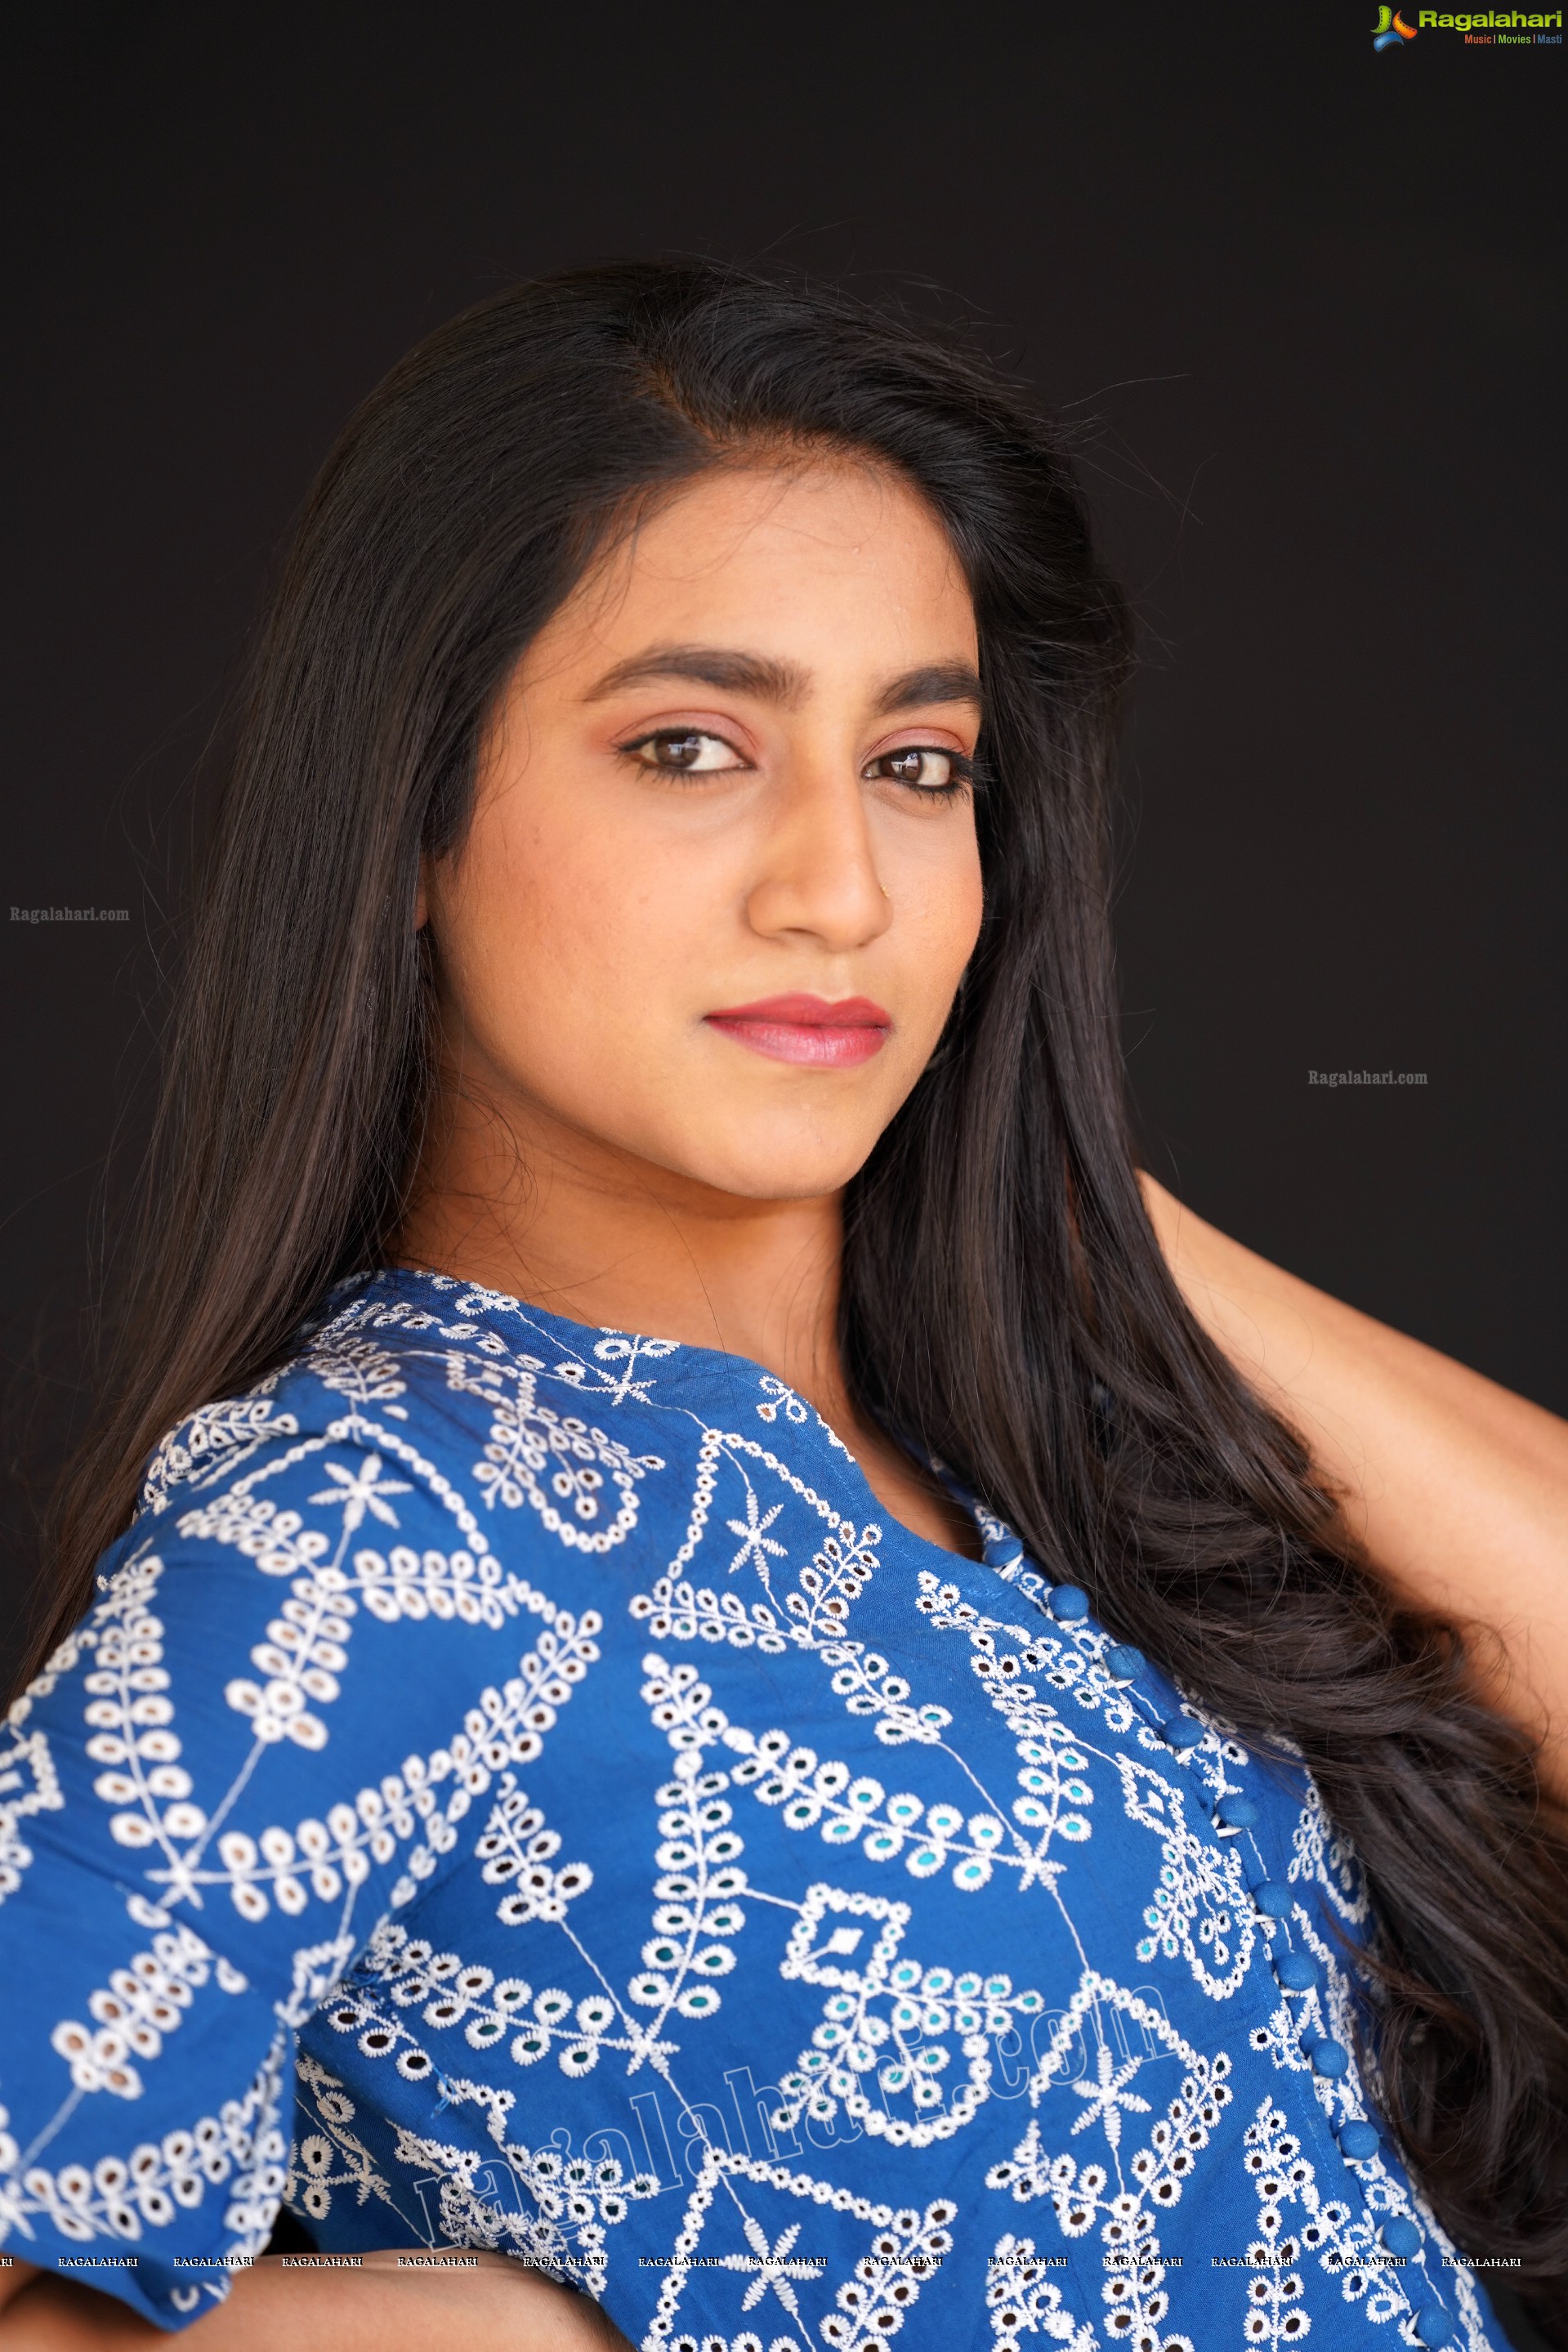 Yuktha in Blue Printed Top and Jeans, Exclusive Photoshoot